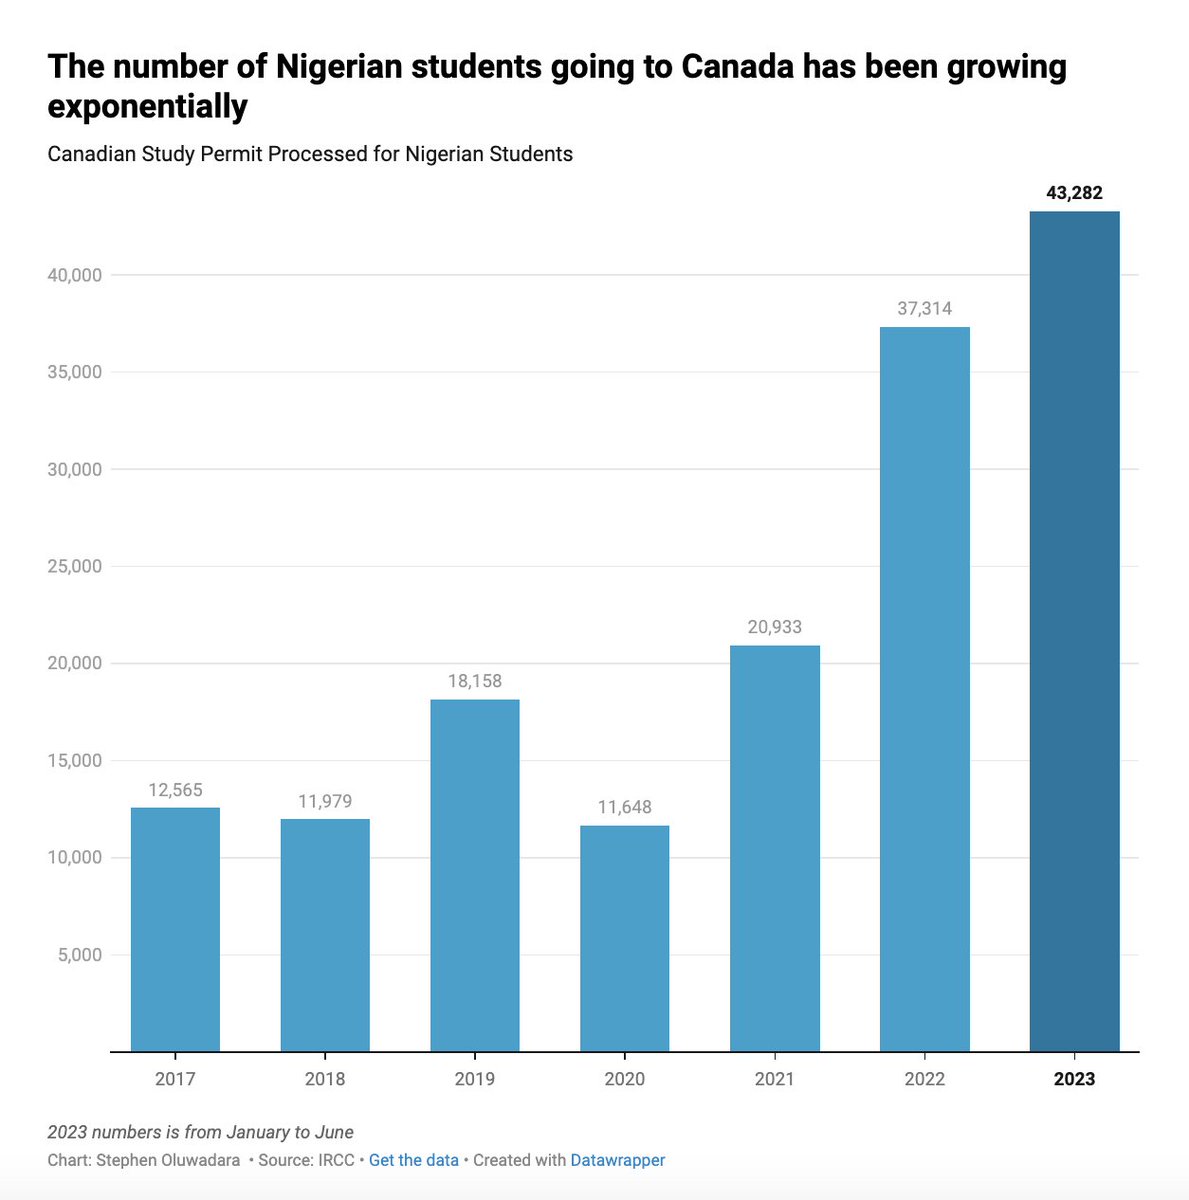 🫨 The Naija student migration to Canada is crazy. The number of Nigerian students going to Canada has grown by about 80% YoY since 2020. The emigration numbers for the first half of the year (Jan-June) have already dwarfed the 2022 total.